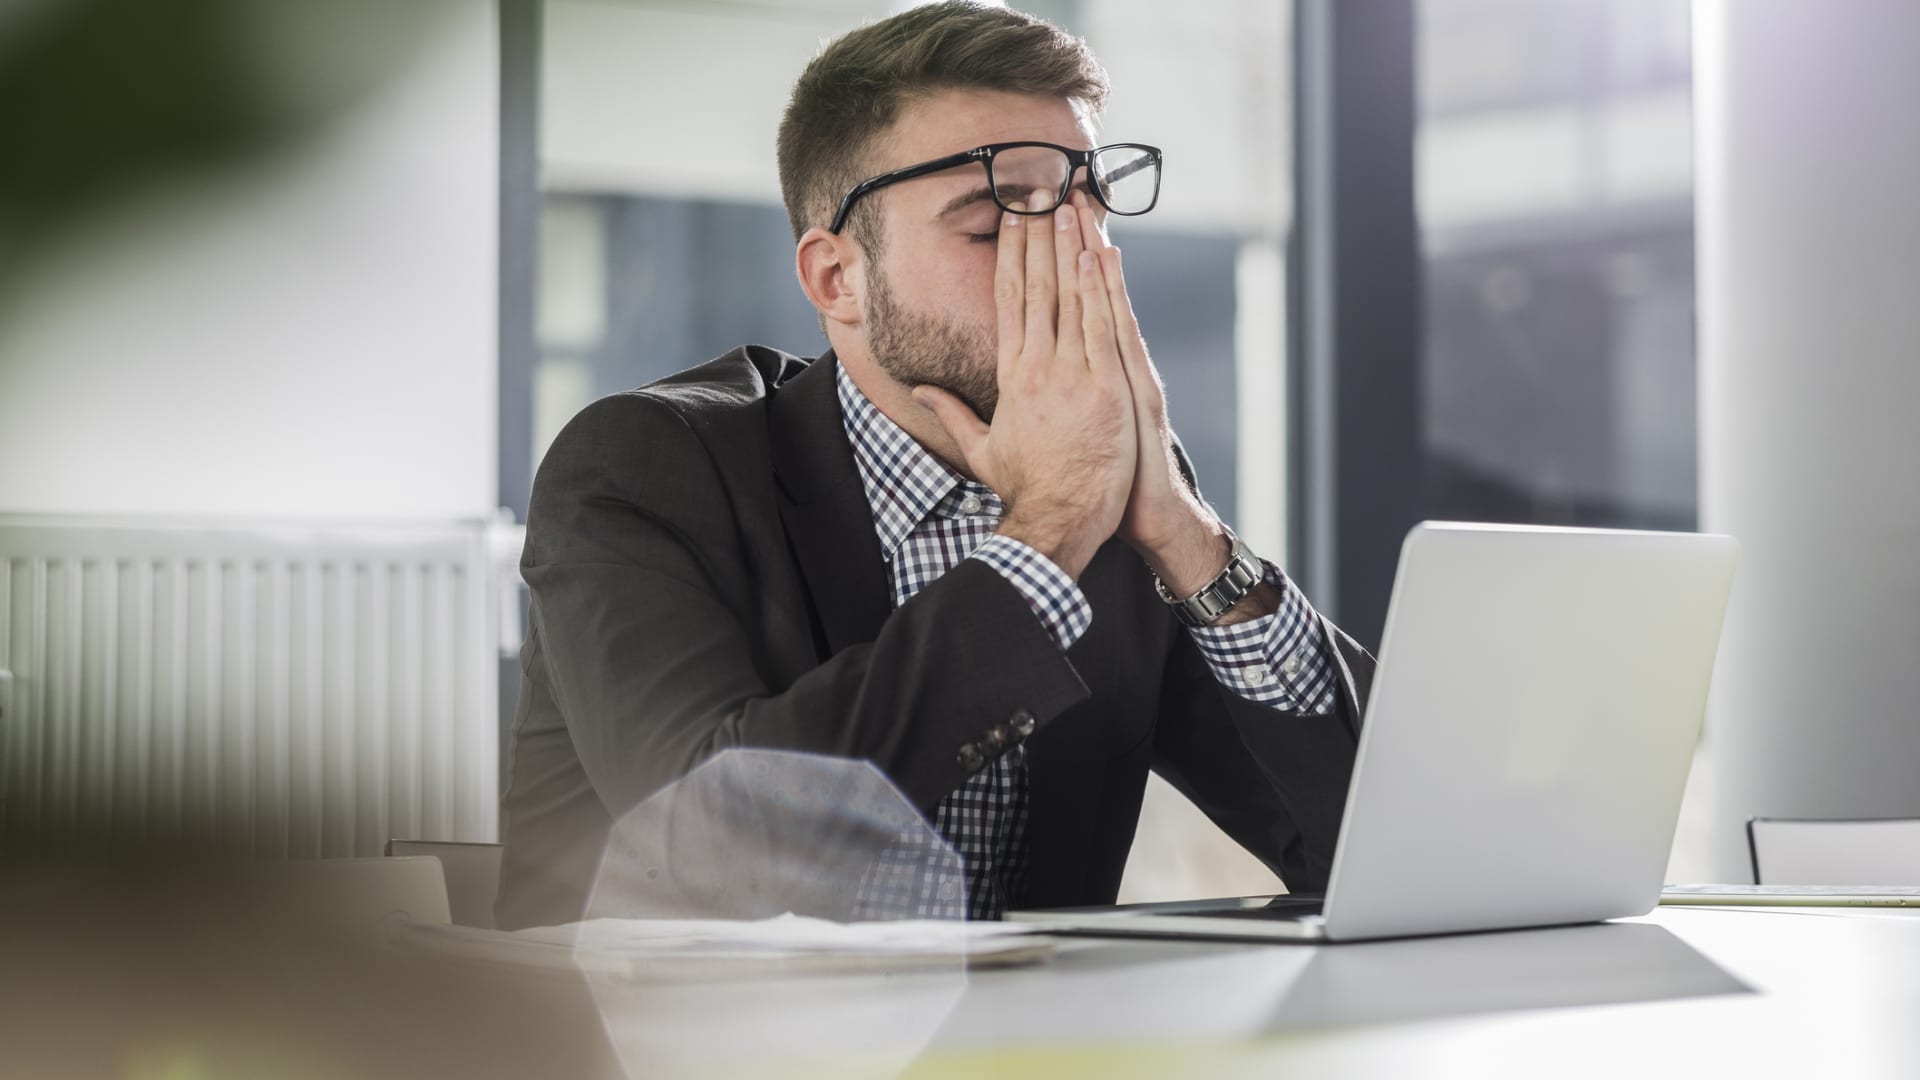 CISOs say stress and burnout are their top personal risks